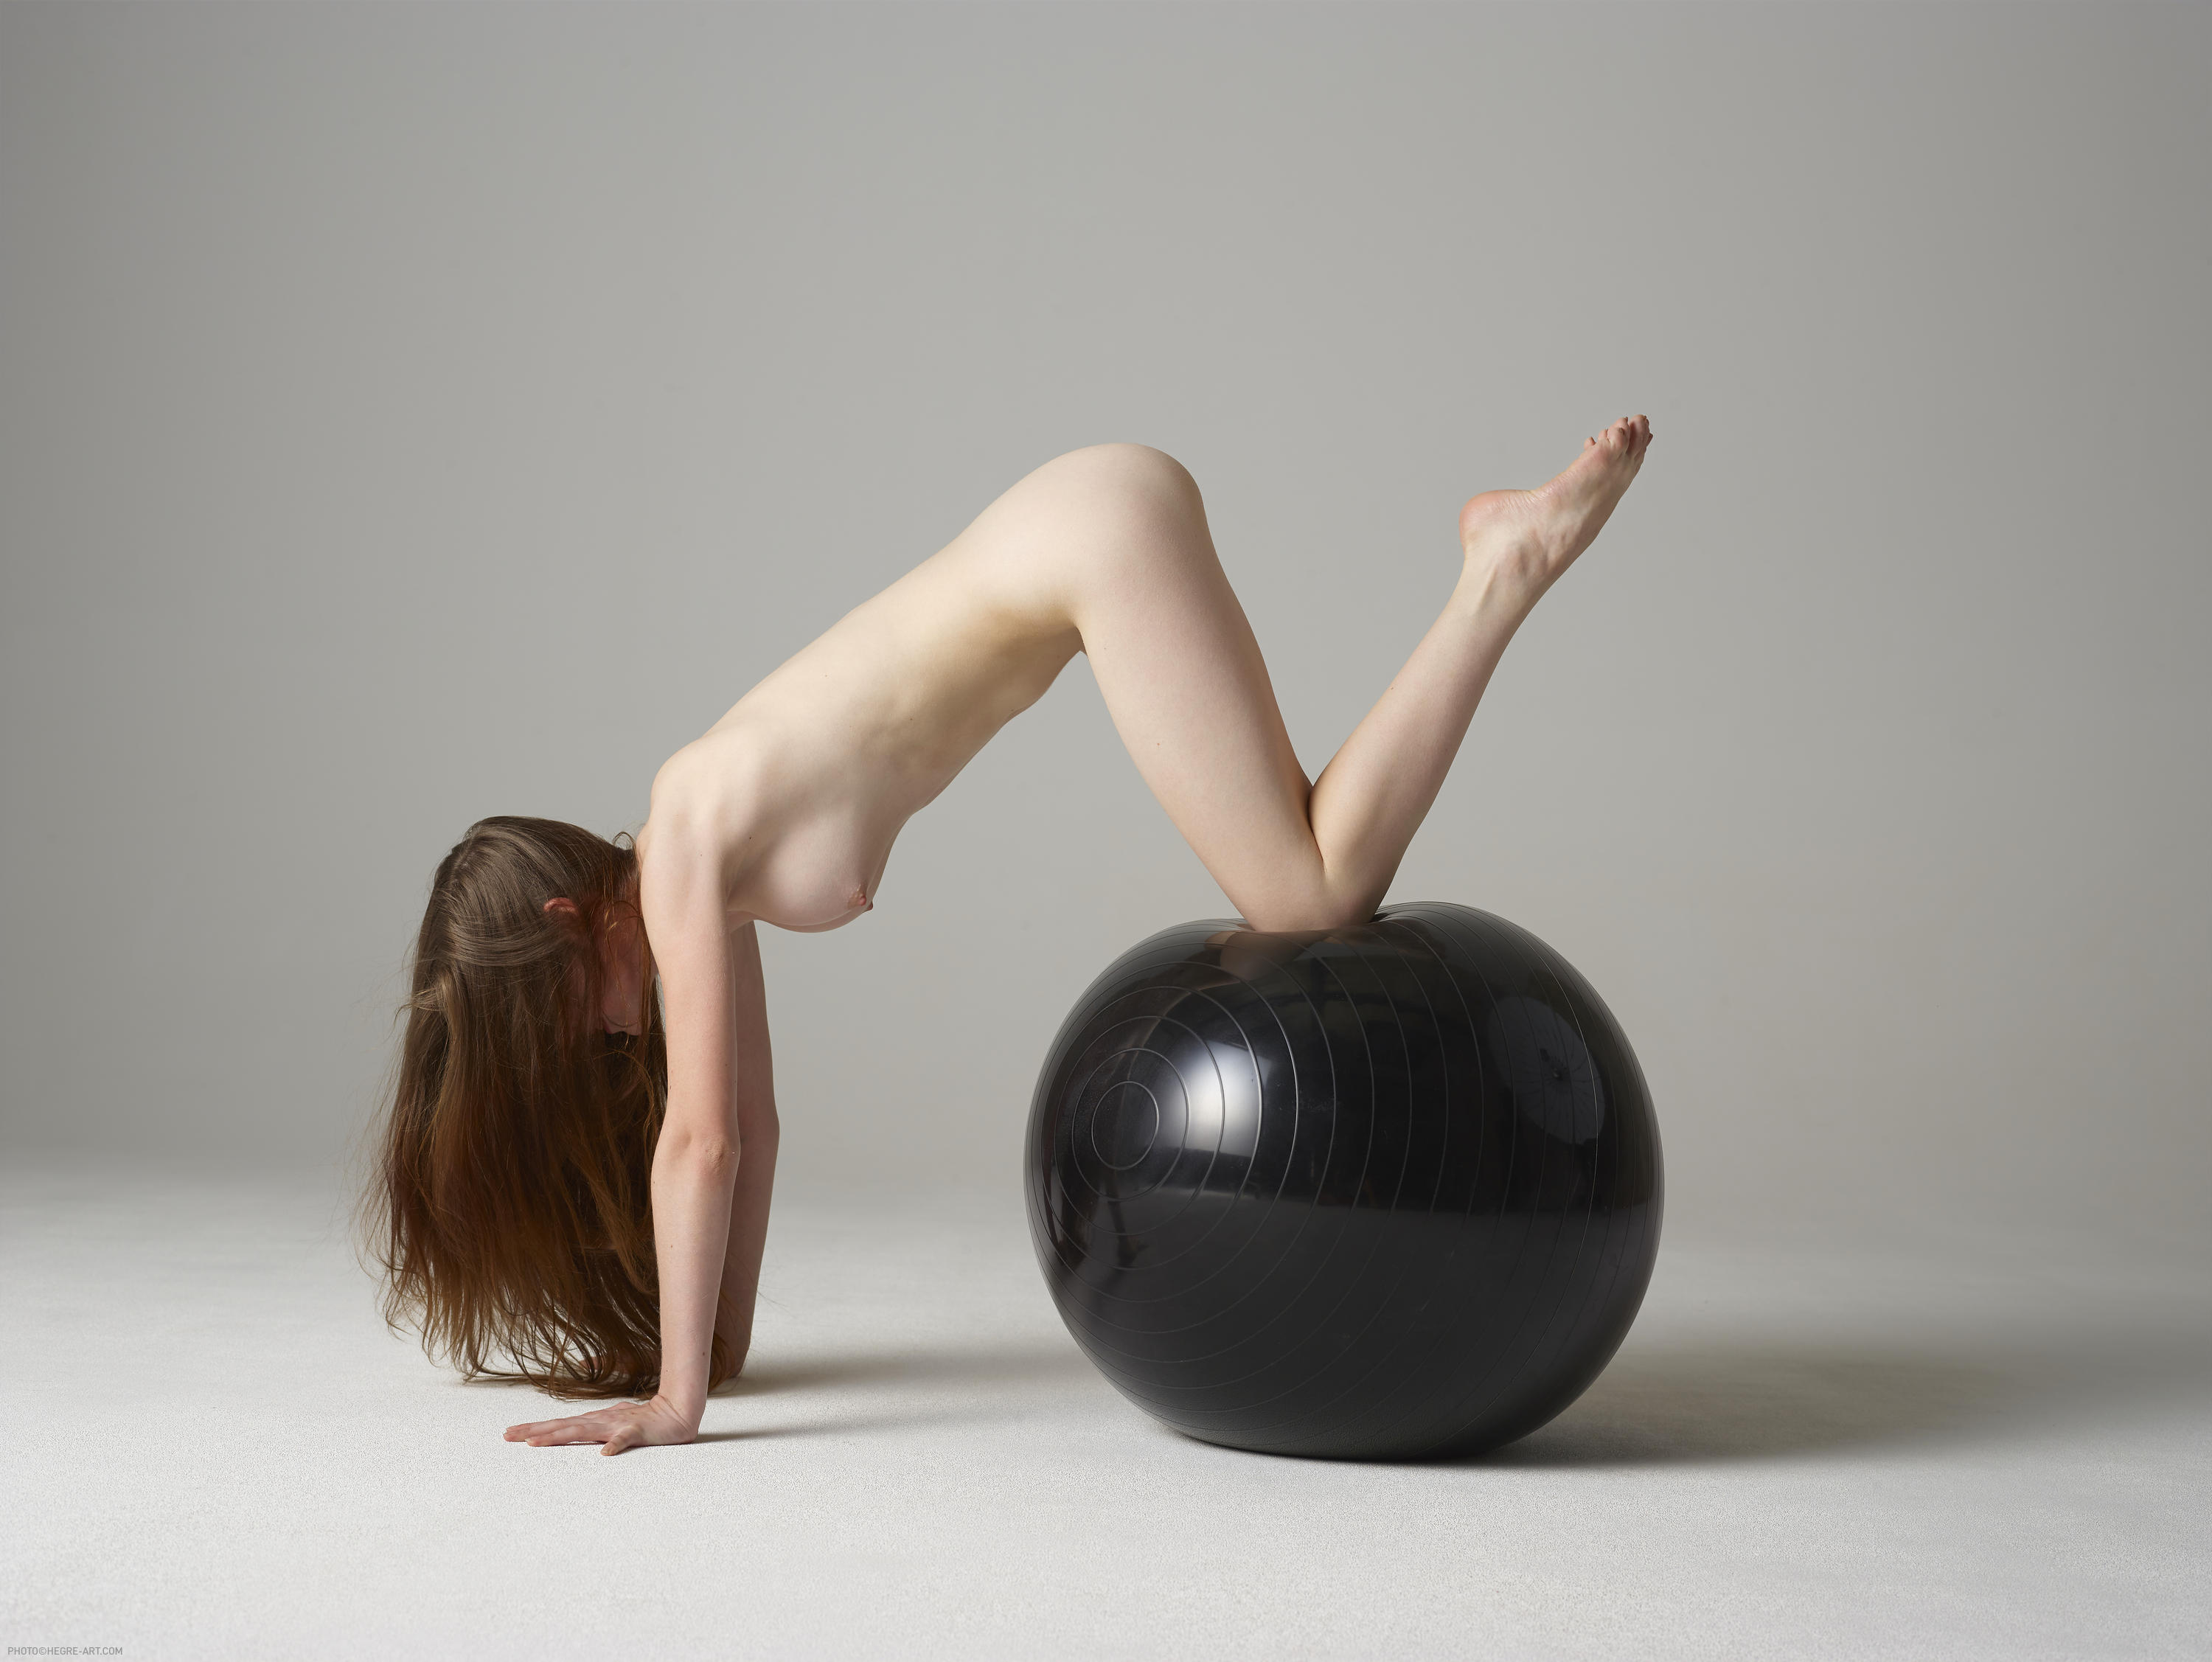 brunette, nude, boobs, exercise, ball, pose